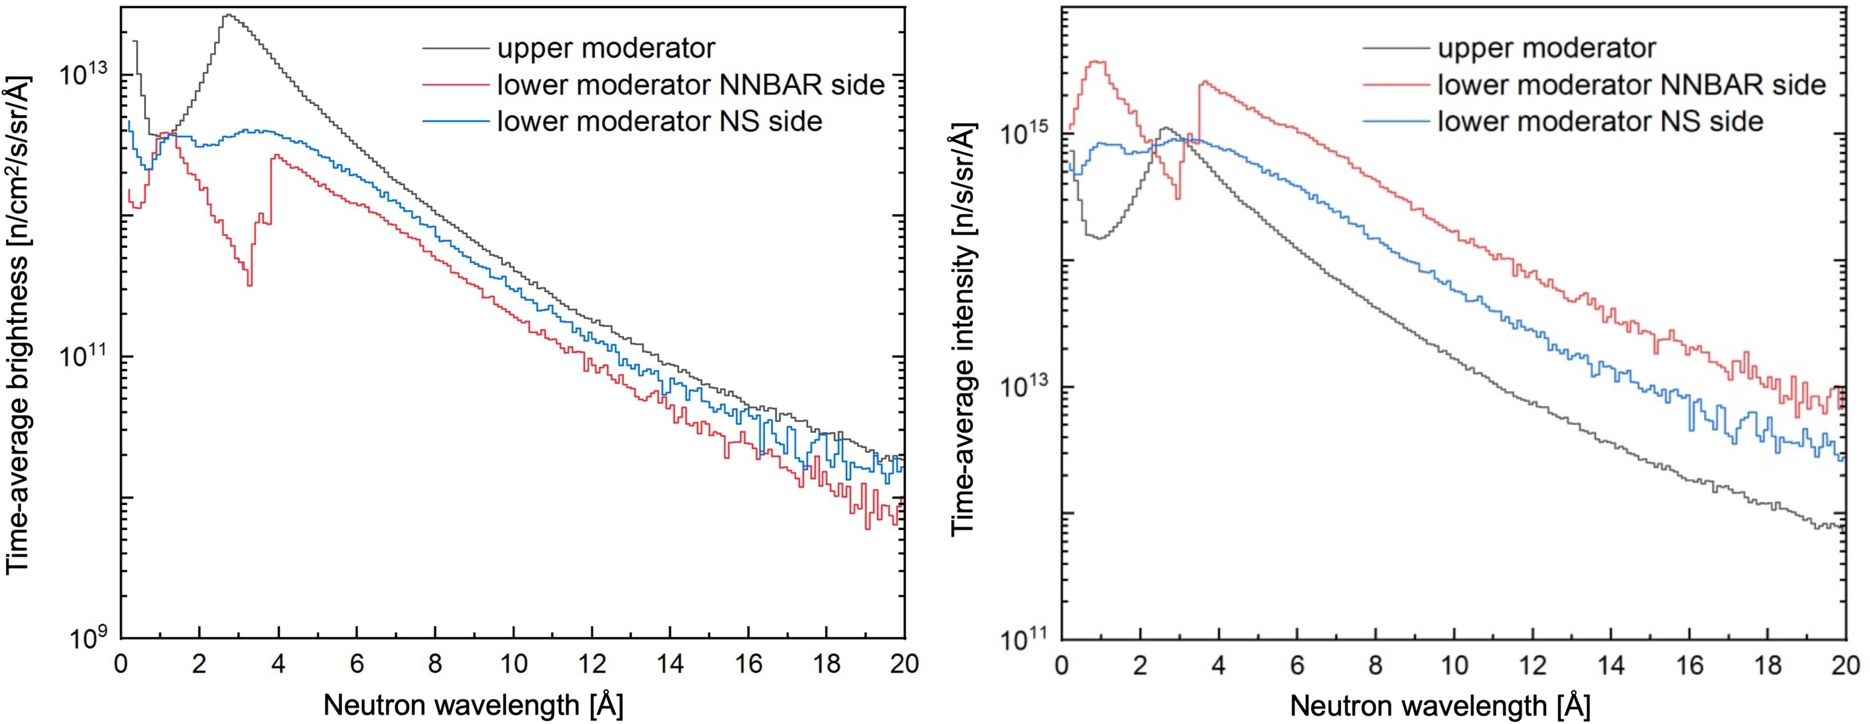 Comparison of spectral brightness (left) and intensity (right) of upper and lower moderators, at 5 MW average power. The spectra for the upper moderator are the average over the 42 beamports. For the lower moderator, preliminary spectra are shown for two openings, i.e., for NNBAR and neutron scattering experiments. The calculated intensities refer to the emission windows with sizes specified in the caption of Table 1. Note the effect of the Be filter/reflector on the spectra for the NNBAR opening.